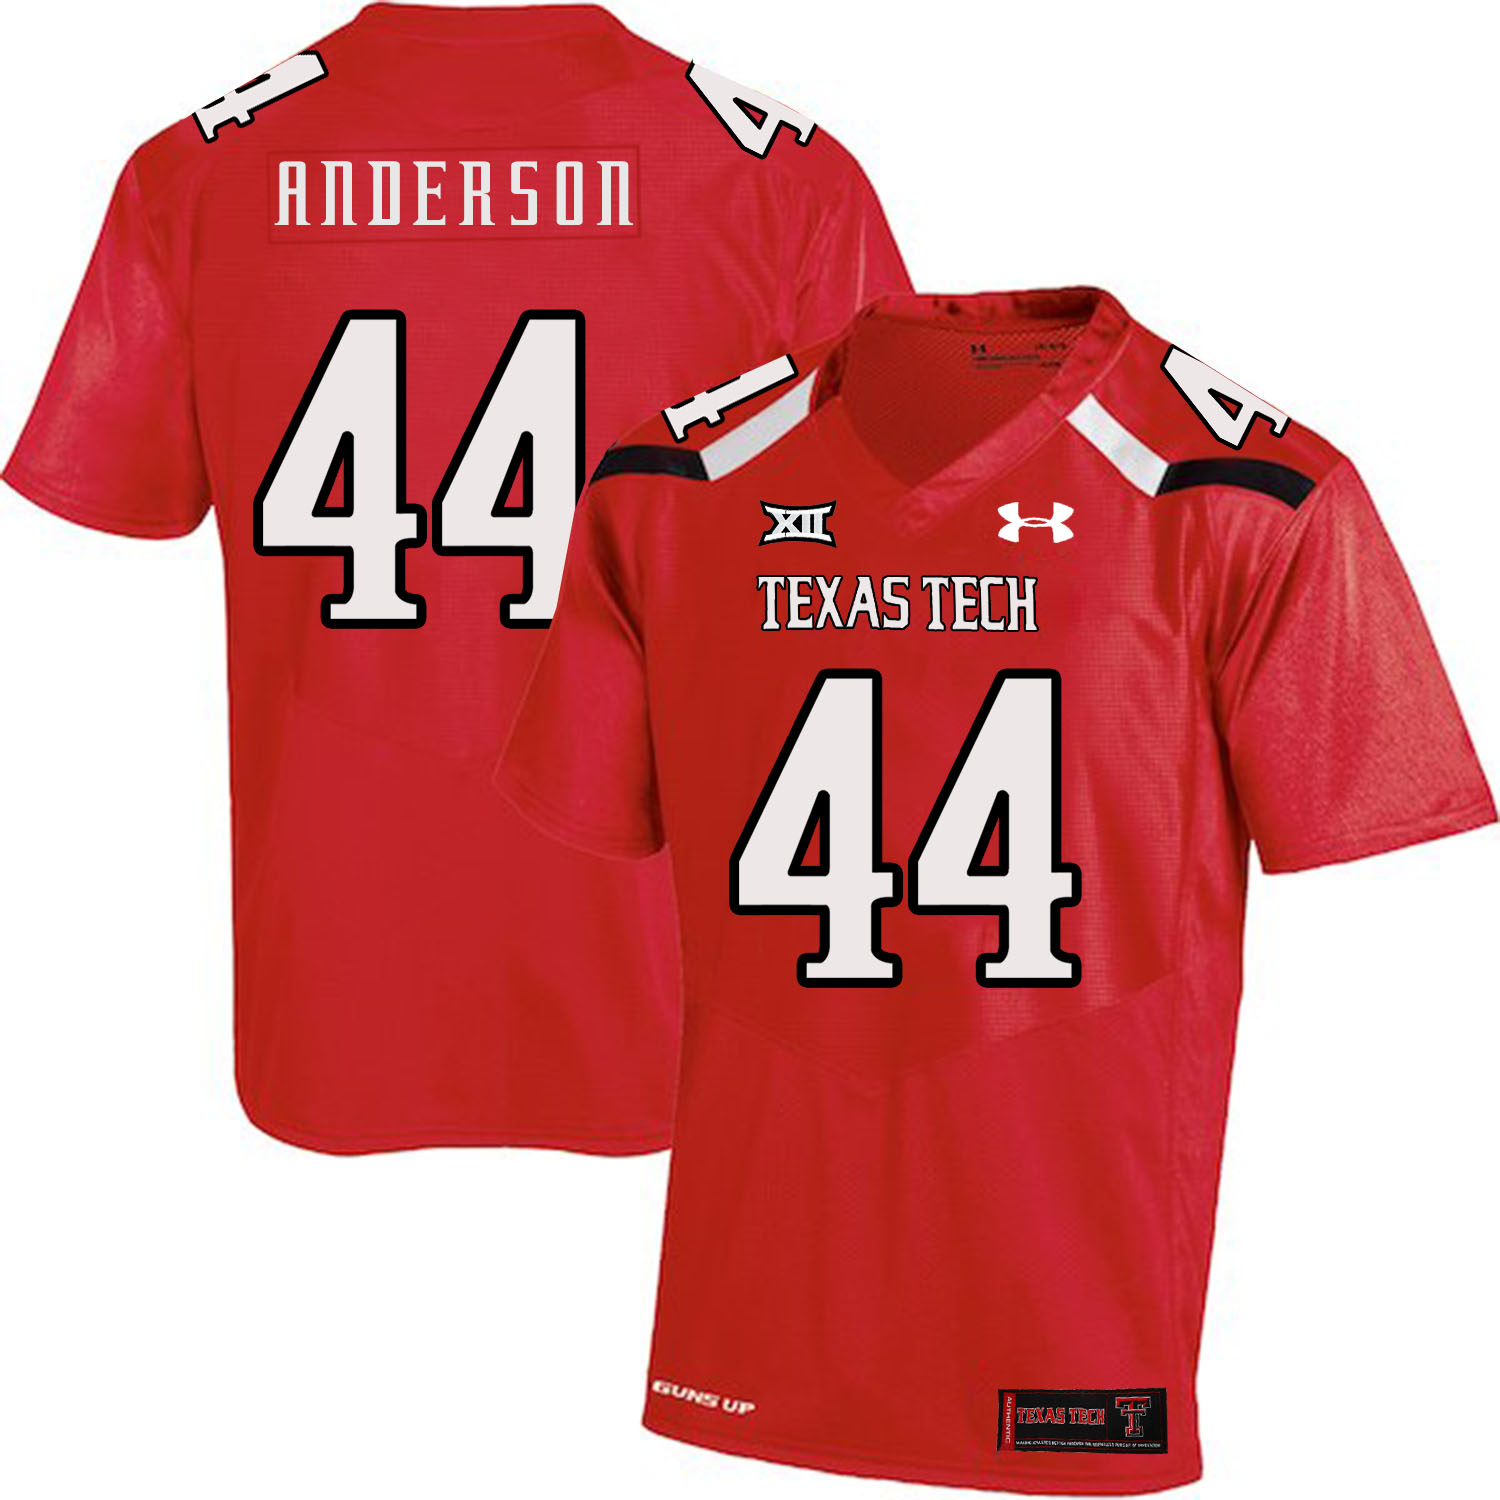 Texas Tech Red Raiders 44 Donny Anderson Red College Football Jersey